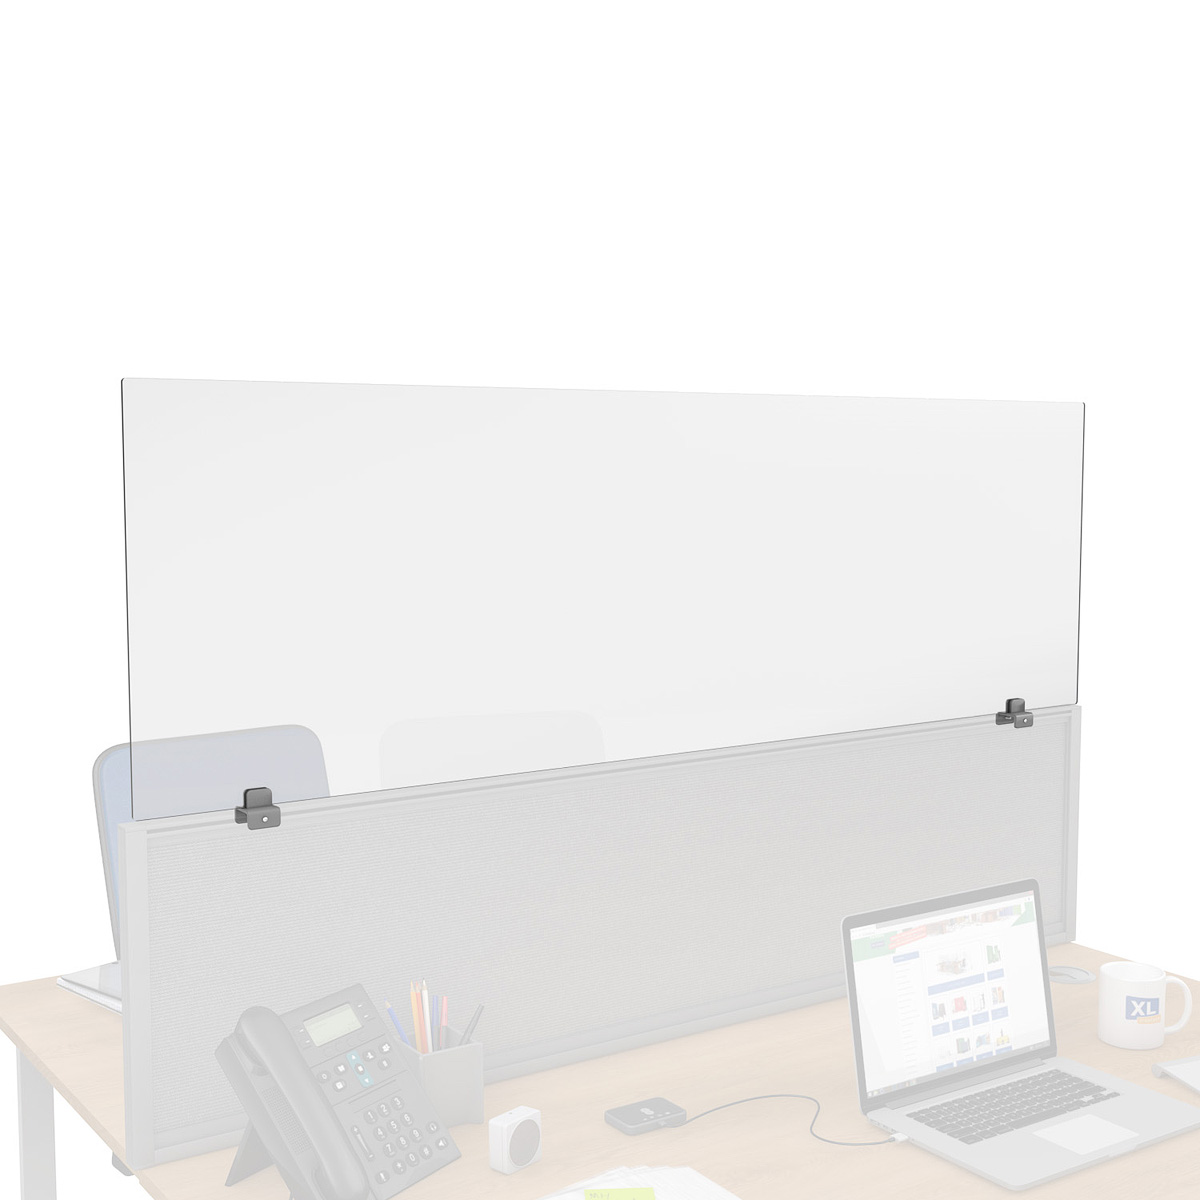 FRONTIER® Sneeze Screen Desk Screen Height Extenders Are Ideal For Social Distancing in Offices